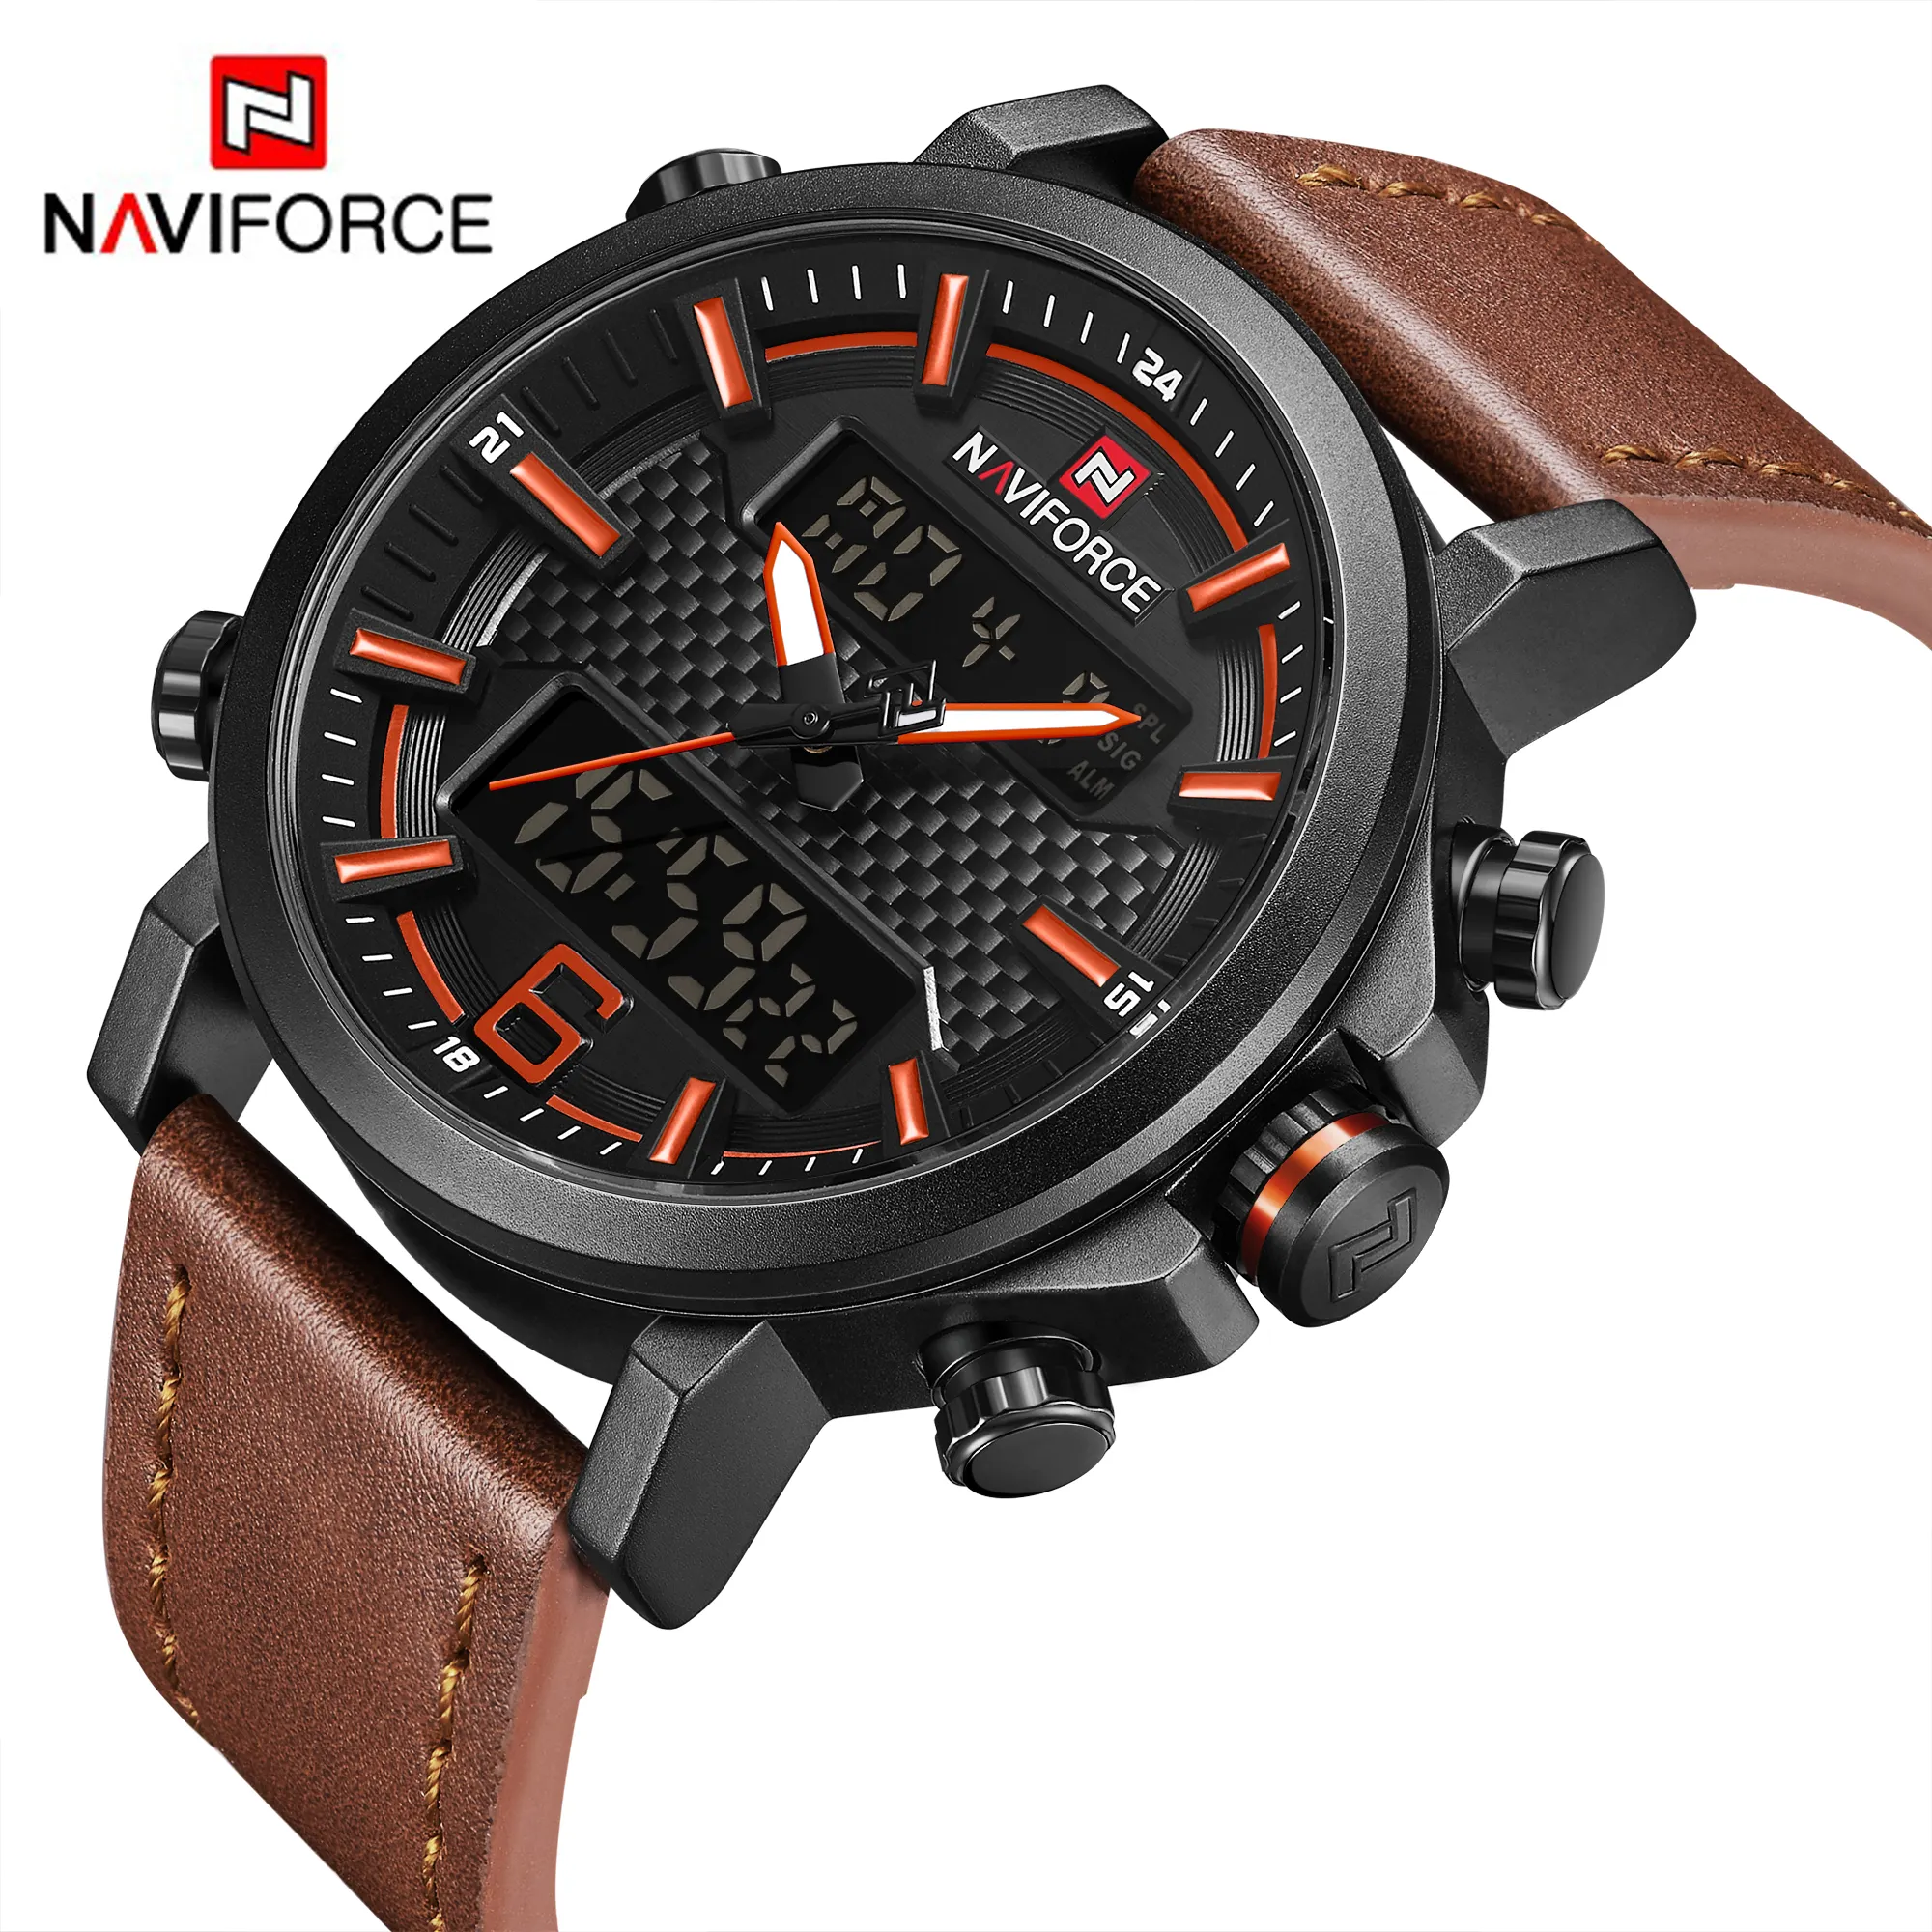 NAVIFORCE New Style Hot Selling Waterproof Men Quartz Wrist Watch With Leather Band